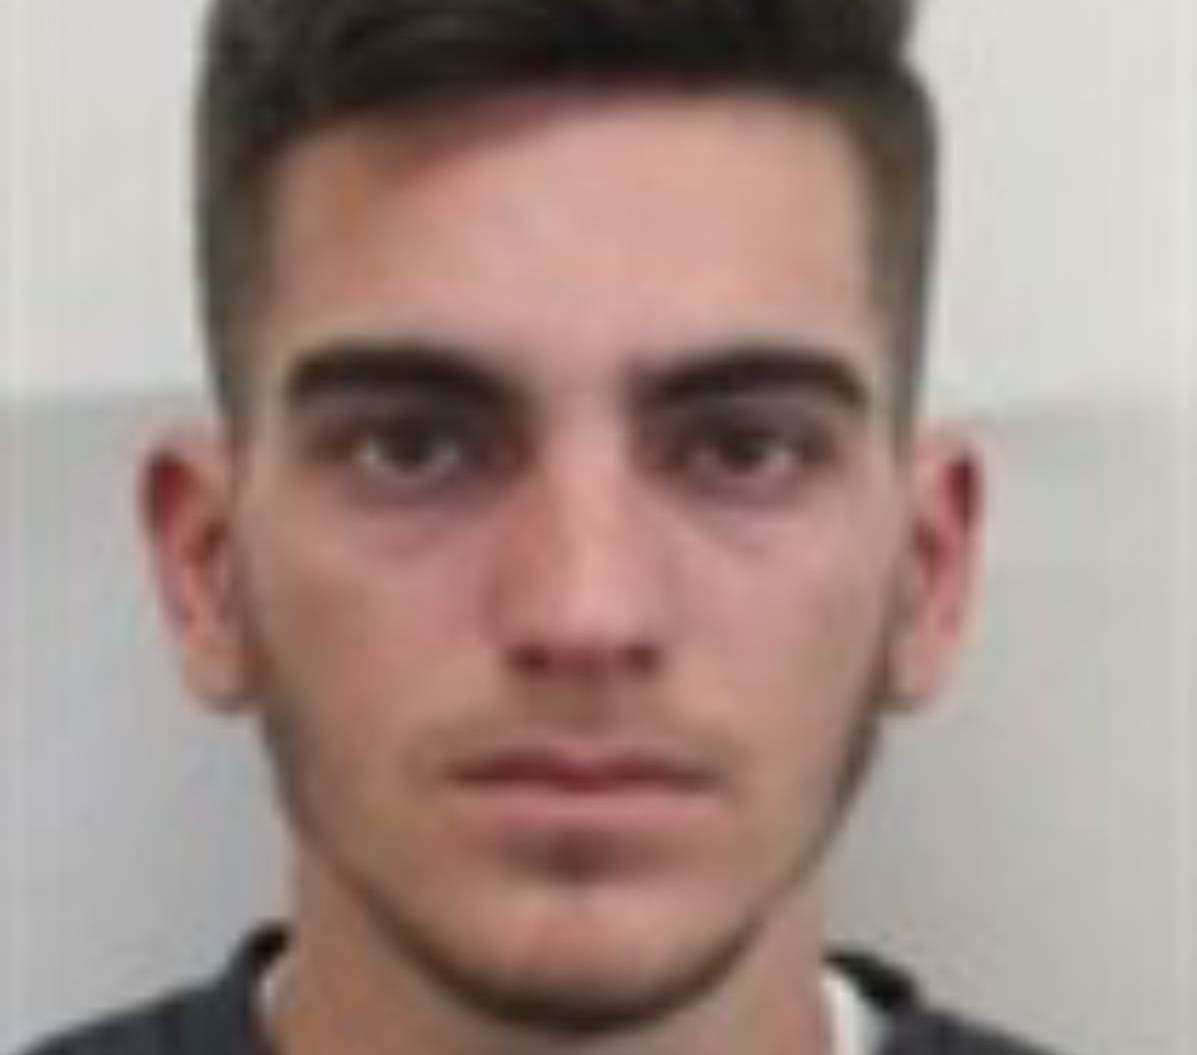 Malvin Xhepa, 17, has been missing from his Kent home for three weeks. Picture: Adur and Worthing Police